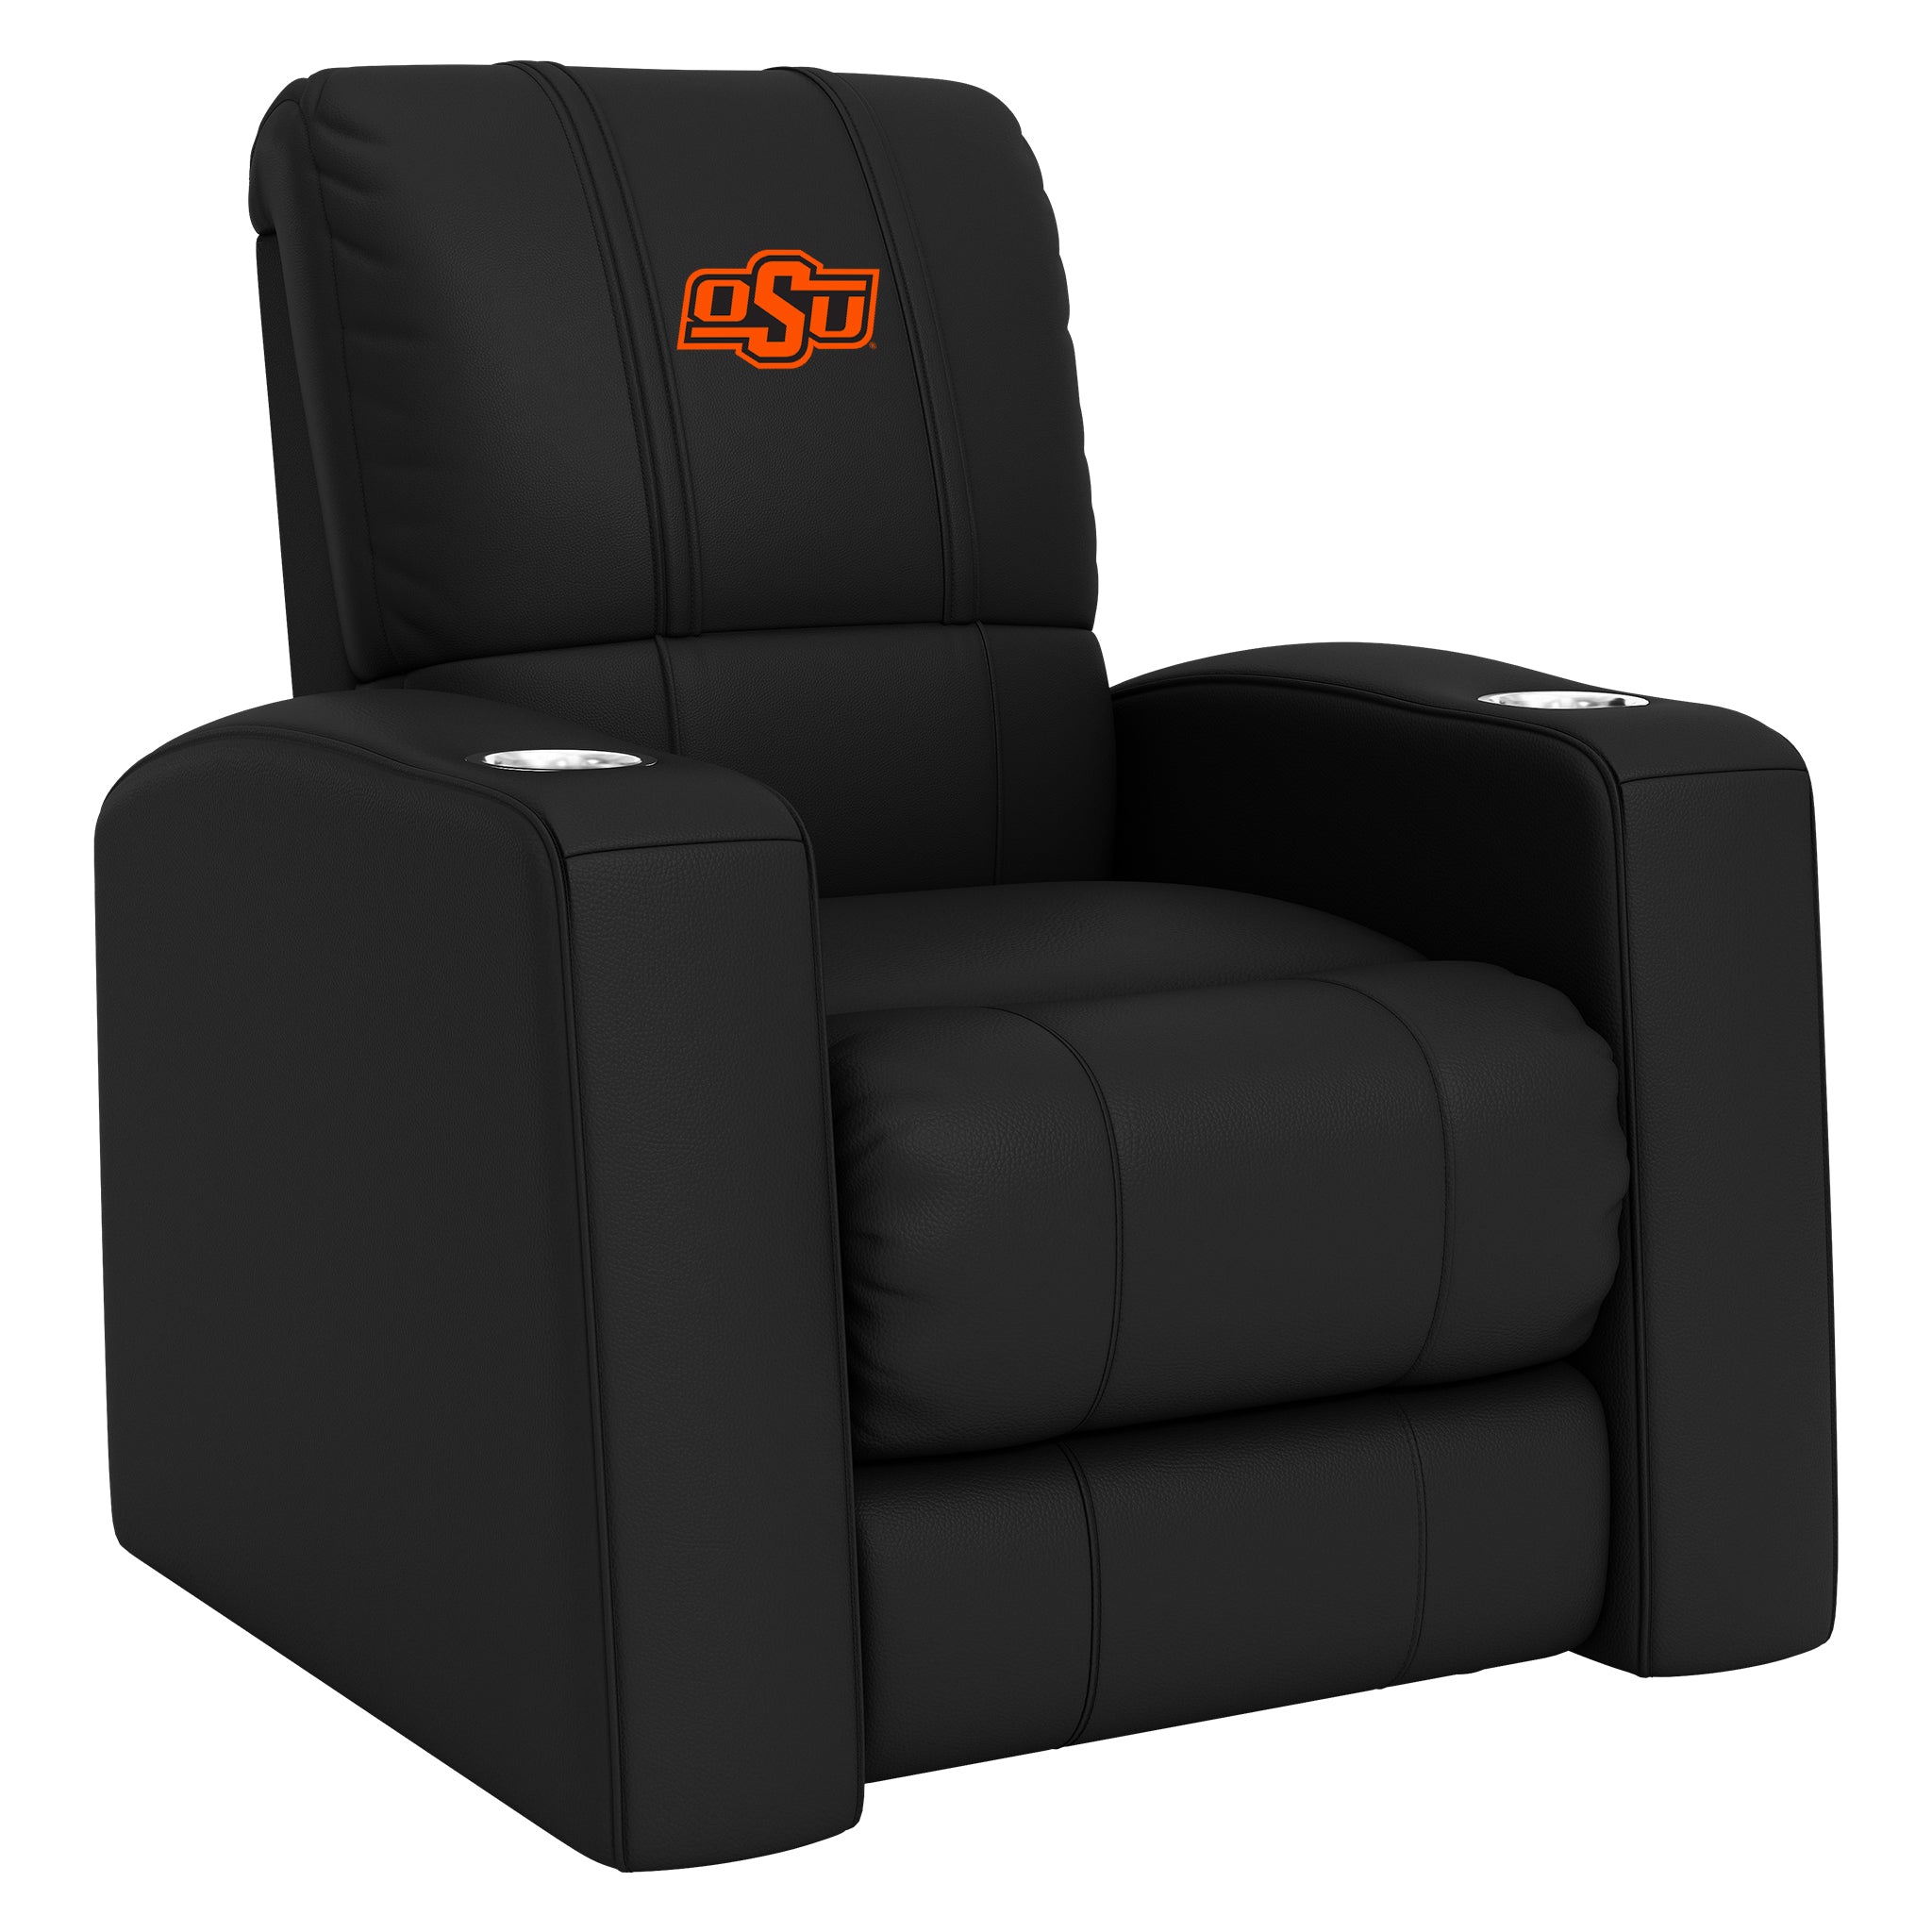 Oklahoma State Cowboys Home Theater Recliner with Oklahoma State Cowboys Logo